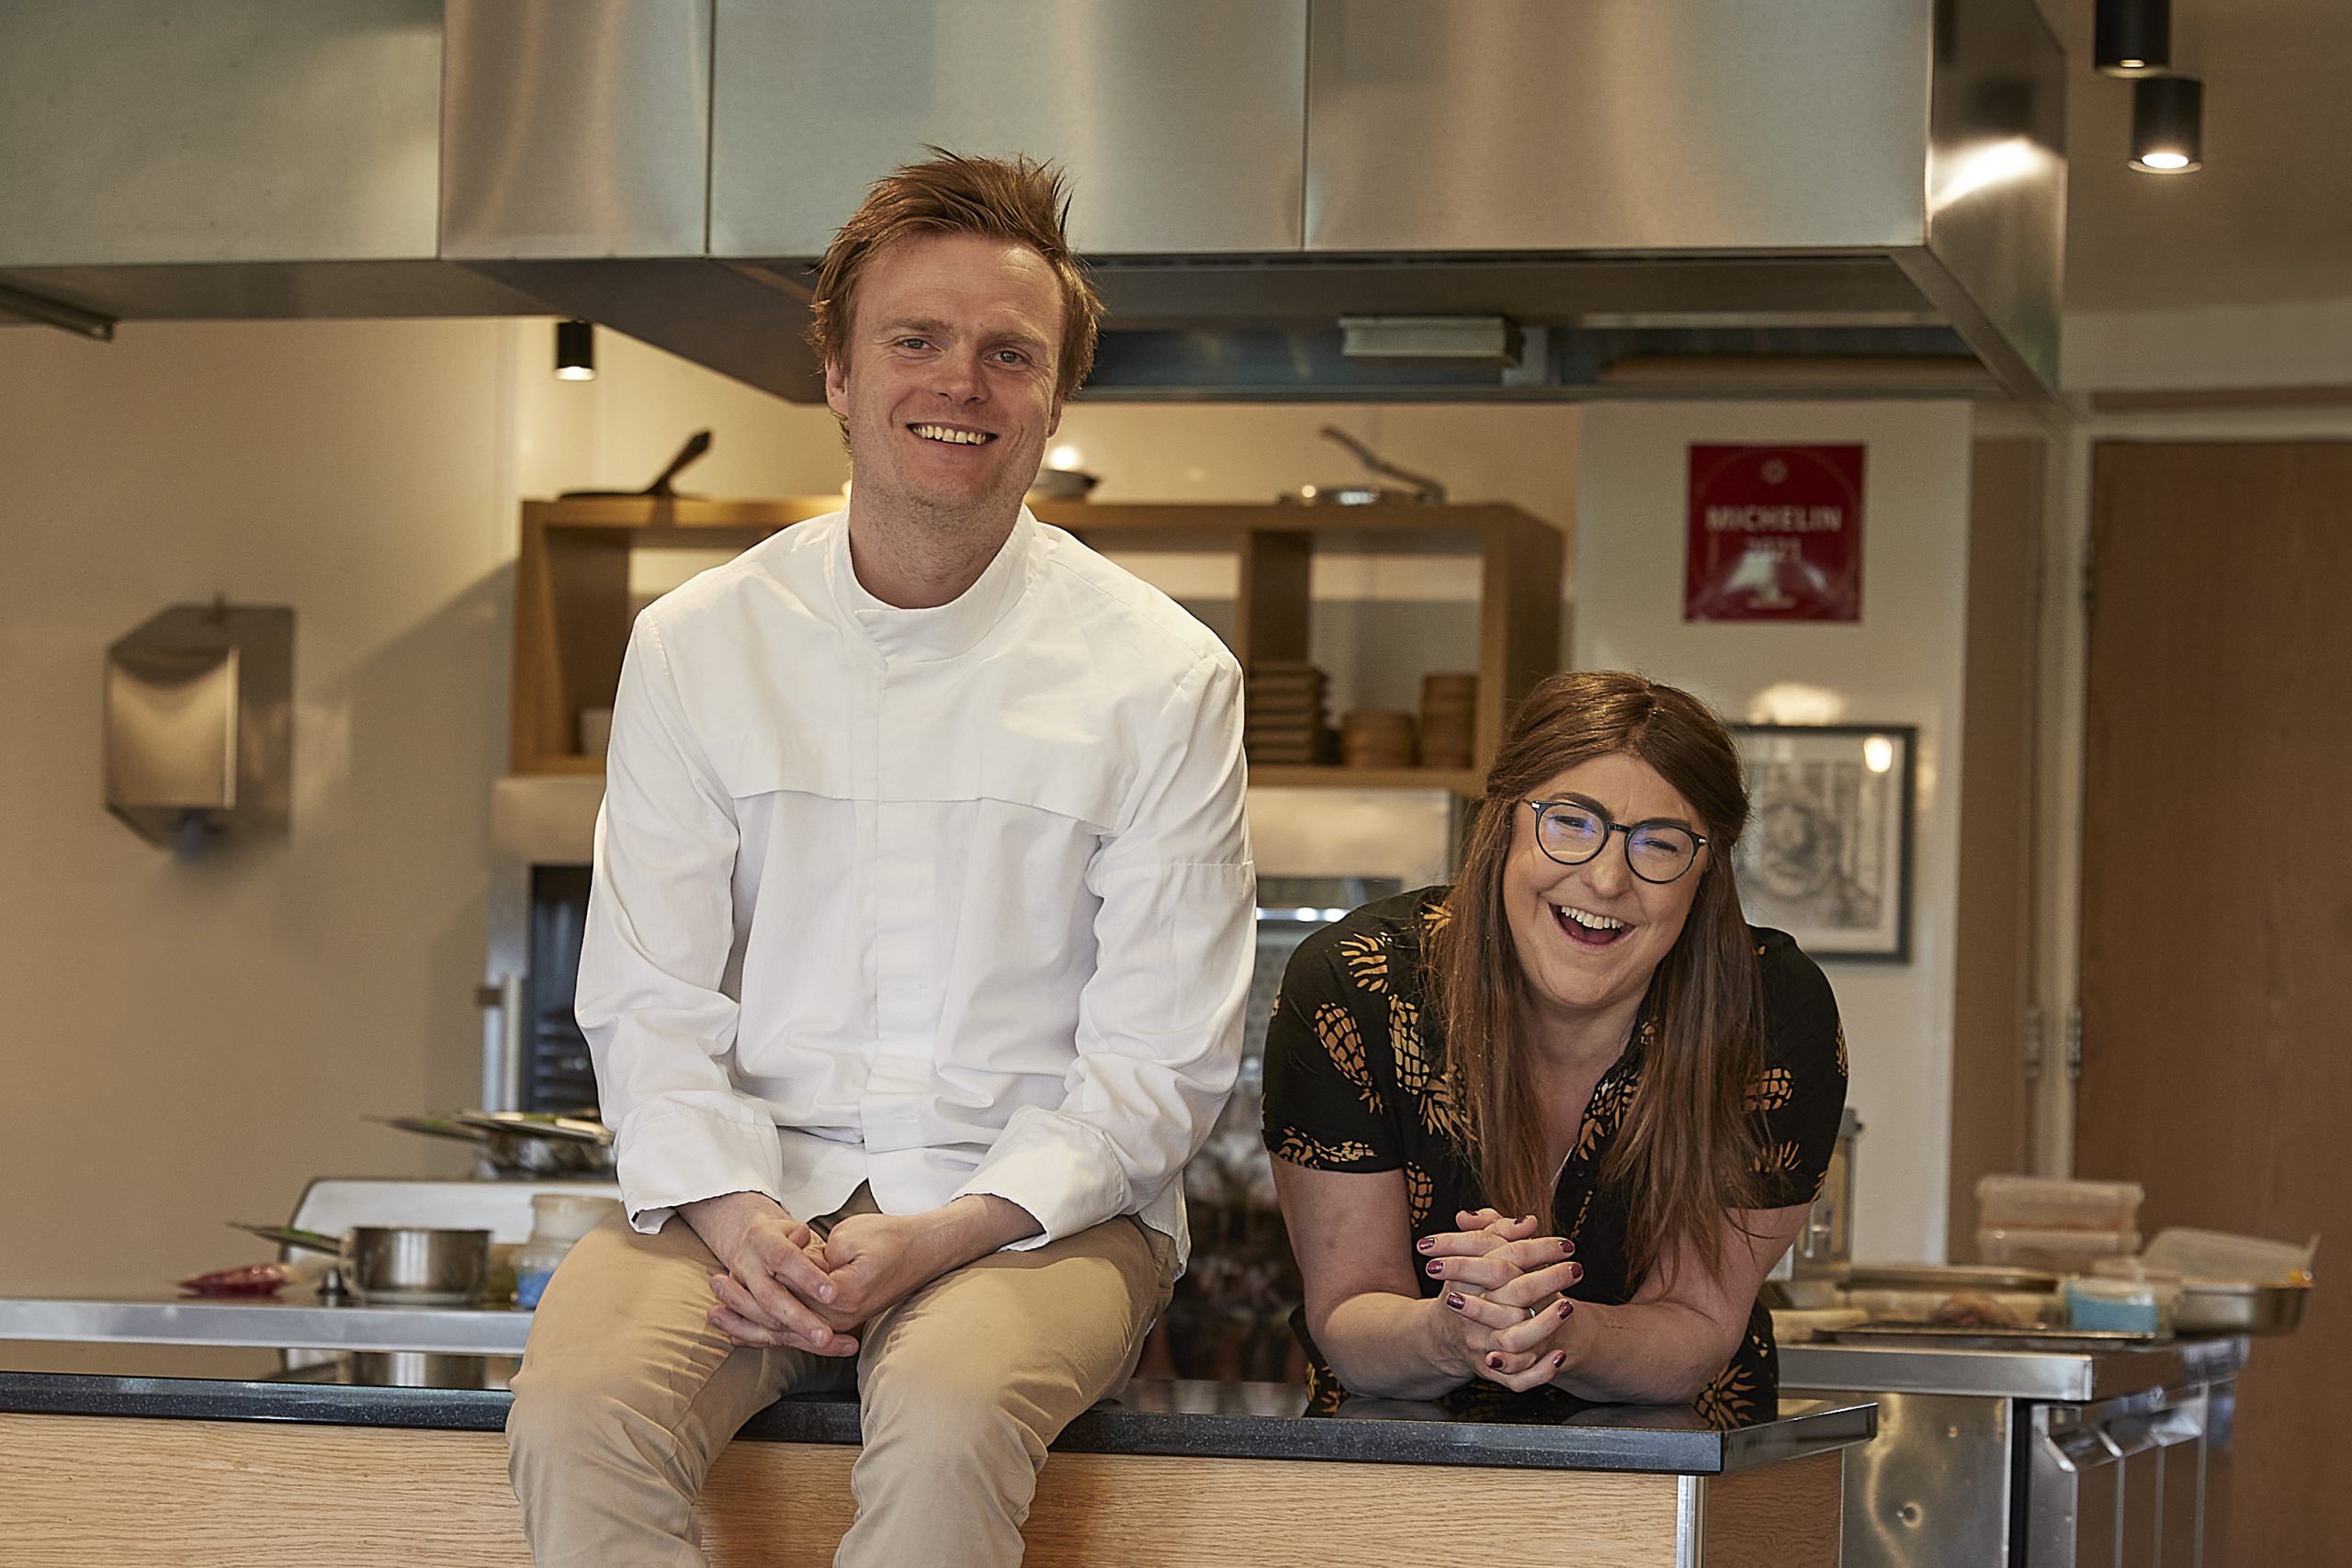 Hjem restaurant owners smiling to camera in a kitchen.